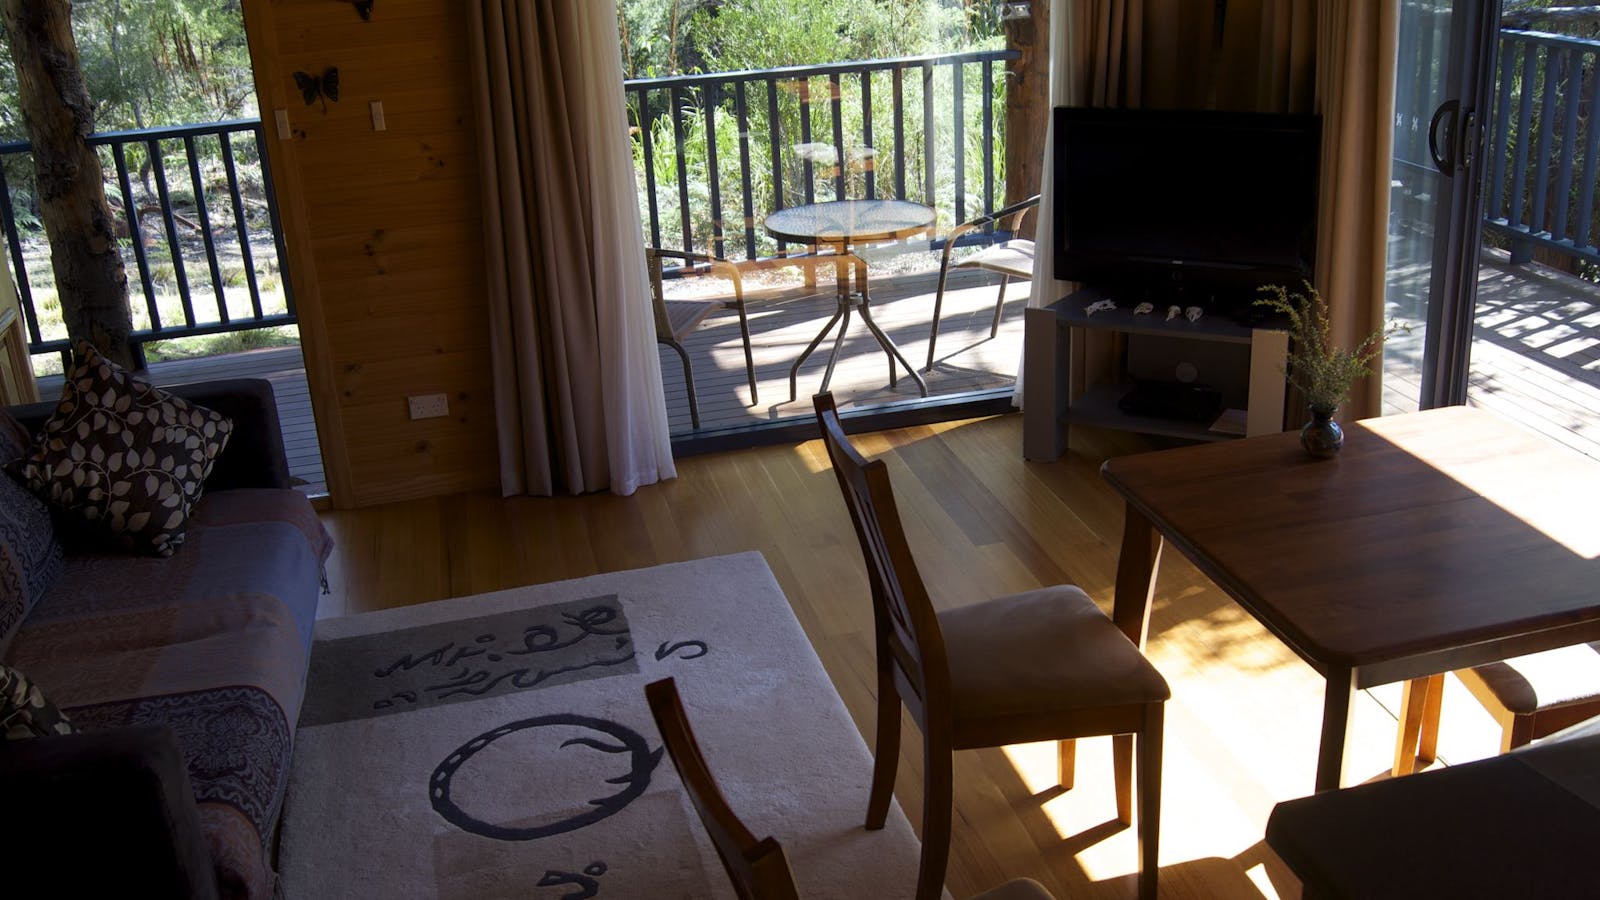 Nairana cottage offers opportunities to watch birds and wallabies from the comfort